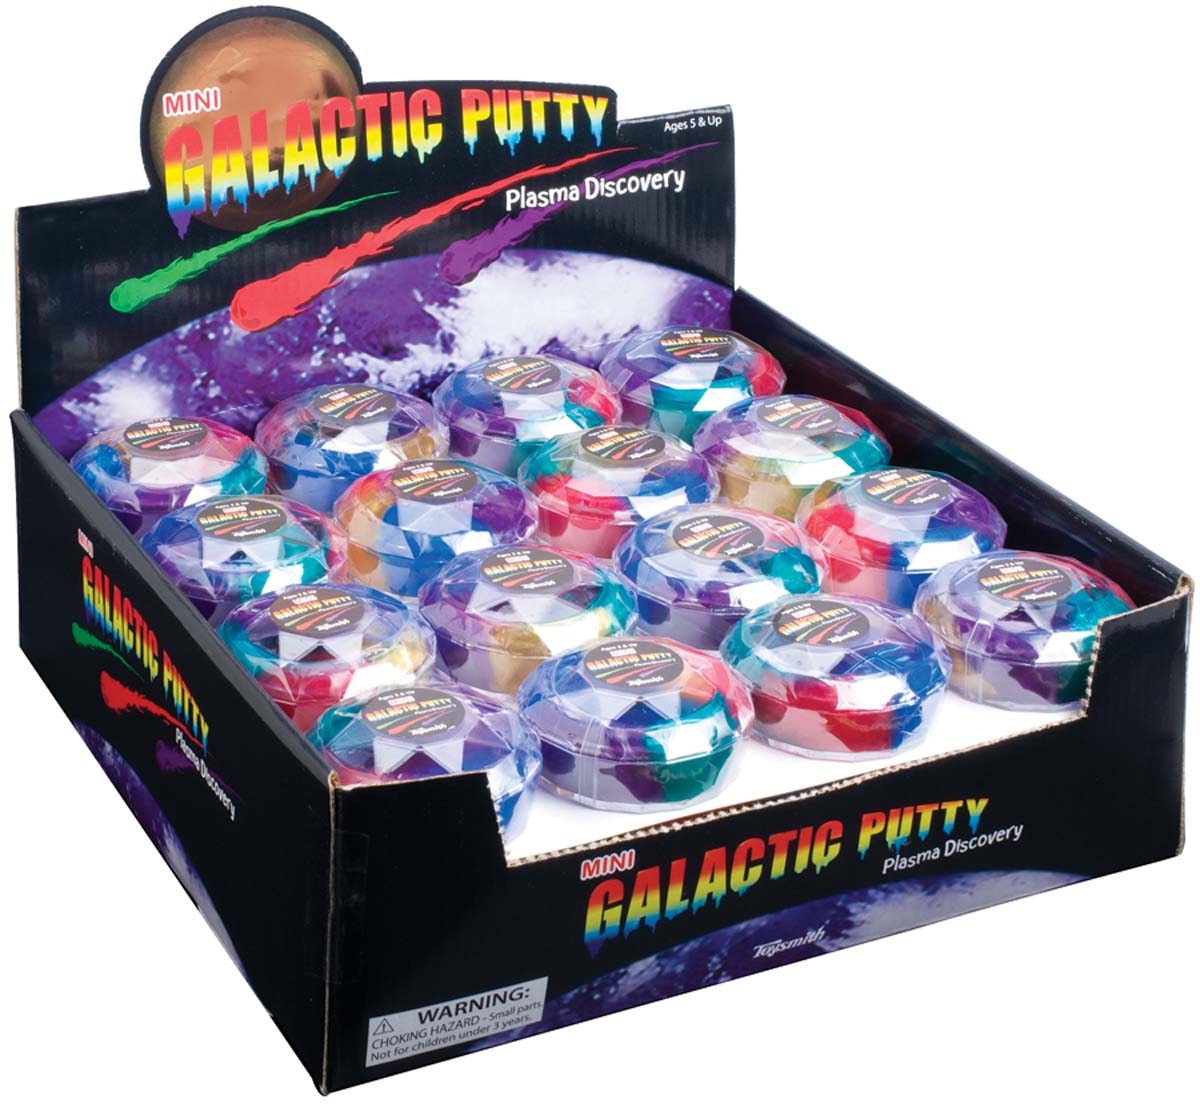 Retail pack containing 16 containers of Galactic Putty 